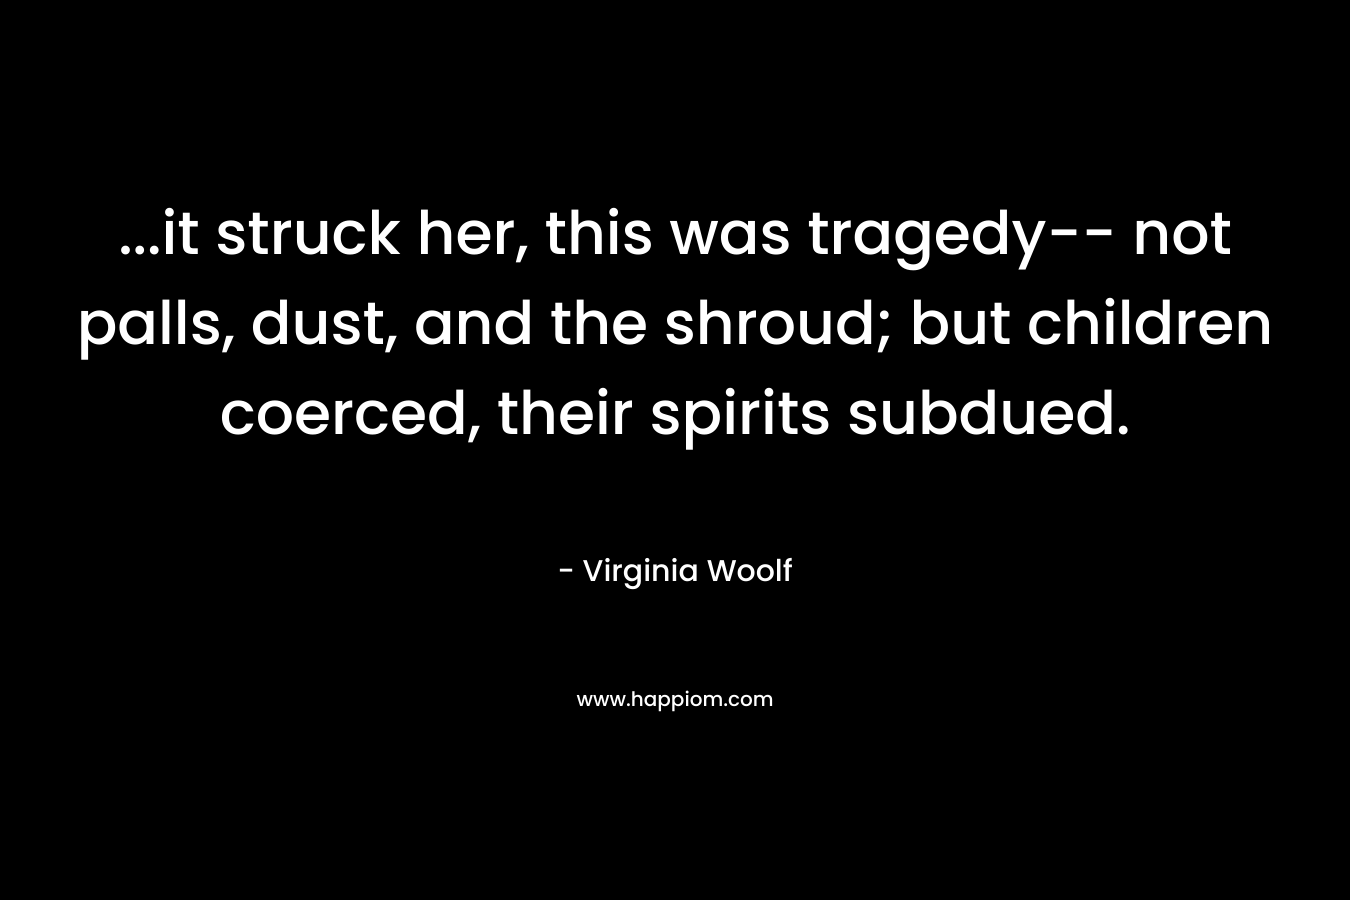 …it struck her, this was tragedy– not palls, dust, and the shroud; but children coerced, their spirits subdued. – Virginia Woolf